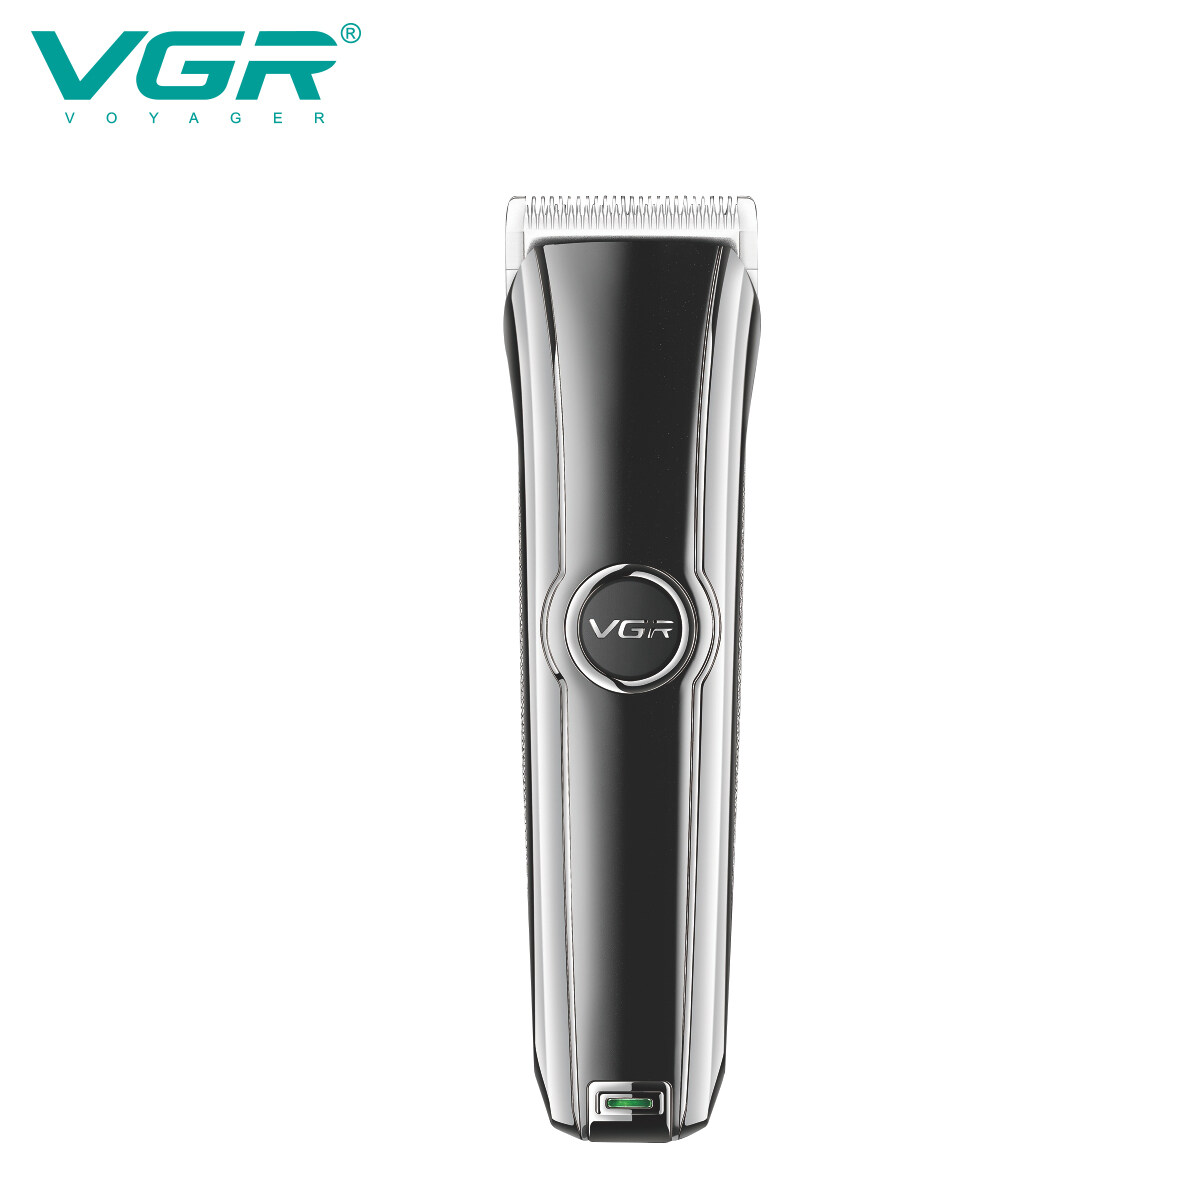 Rechargeable Hair Trimmer Factories, Rechargeable Hair Cut Trimmer Wholesaler, Wholesale Professional Hair Trimmer